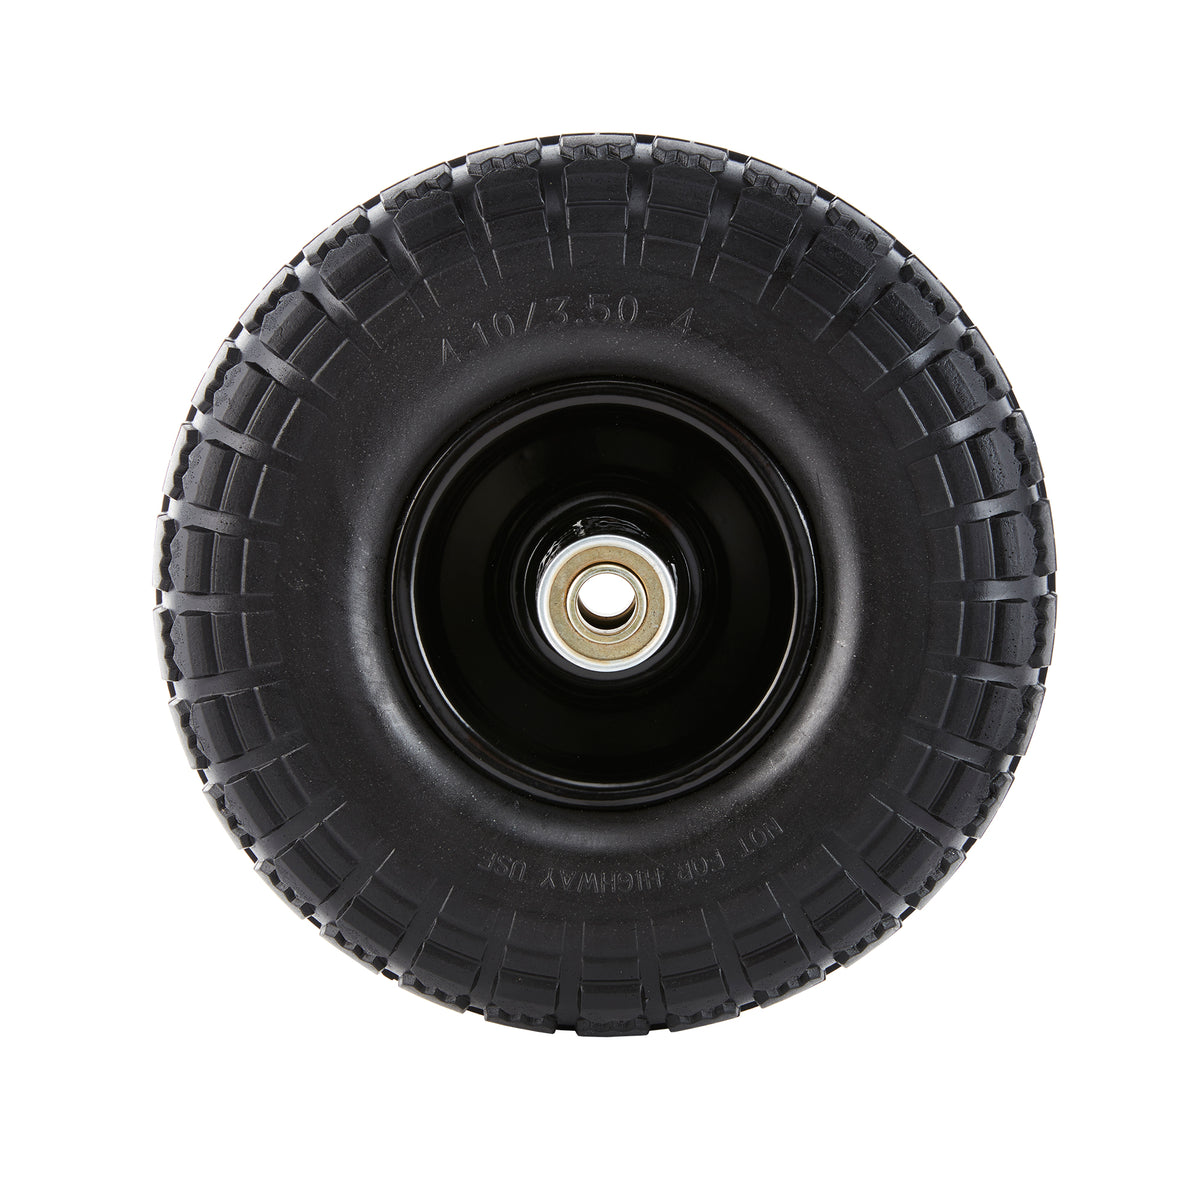 Farm & Ranch FR1030 No-Flat Replacement Tire For Yard Carts, 10 inch